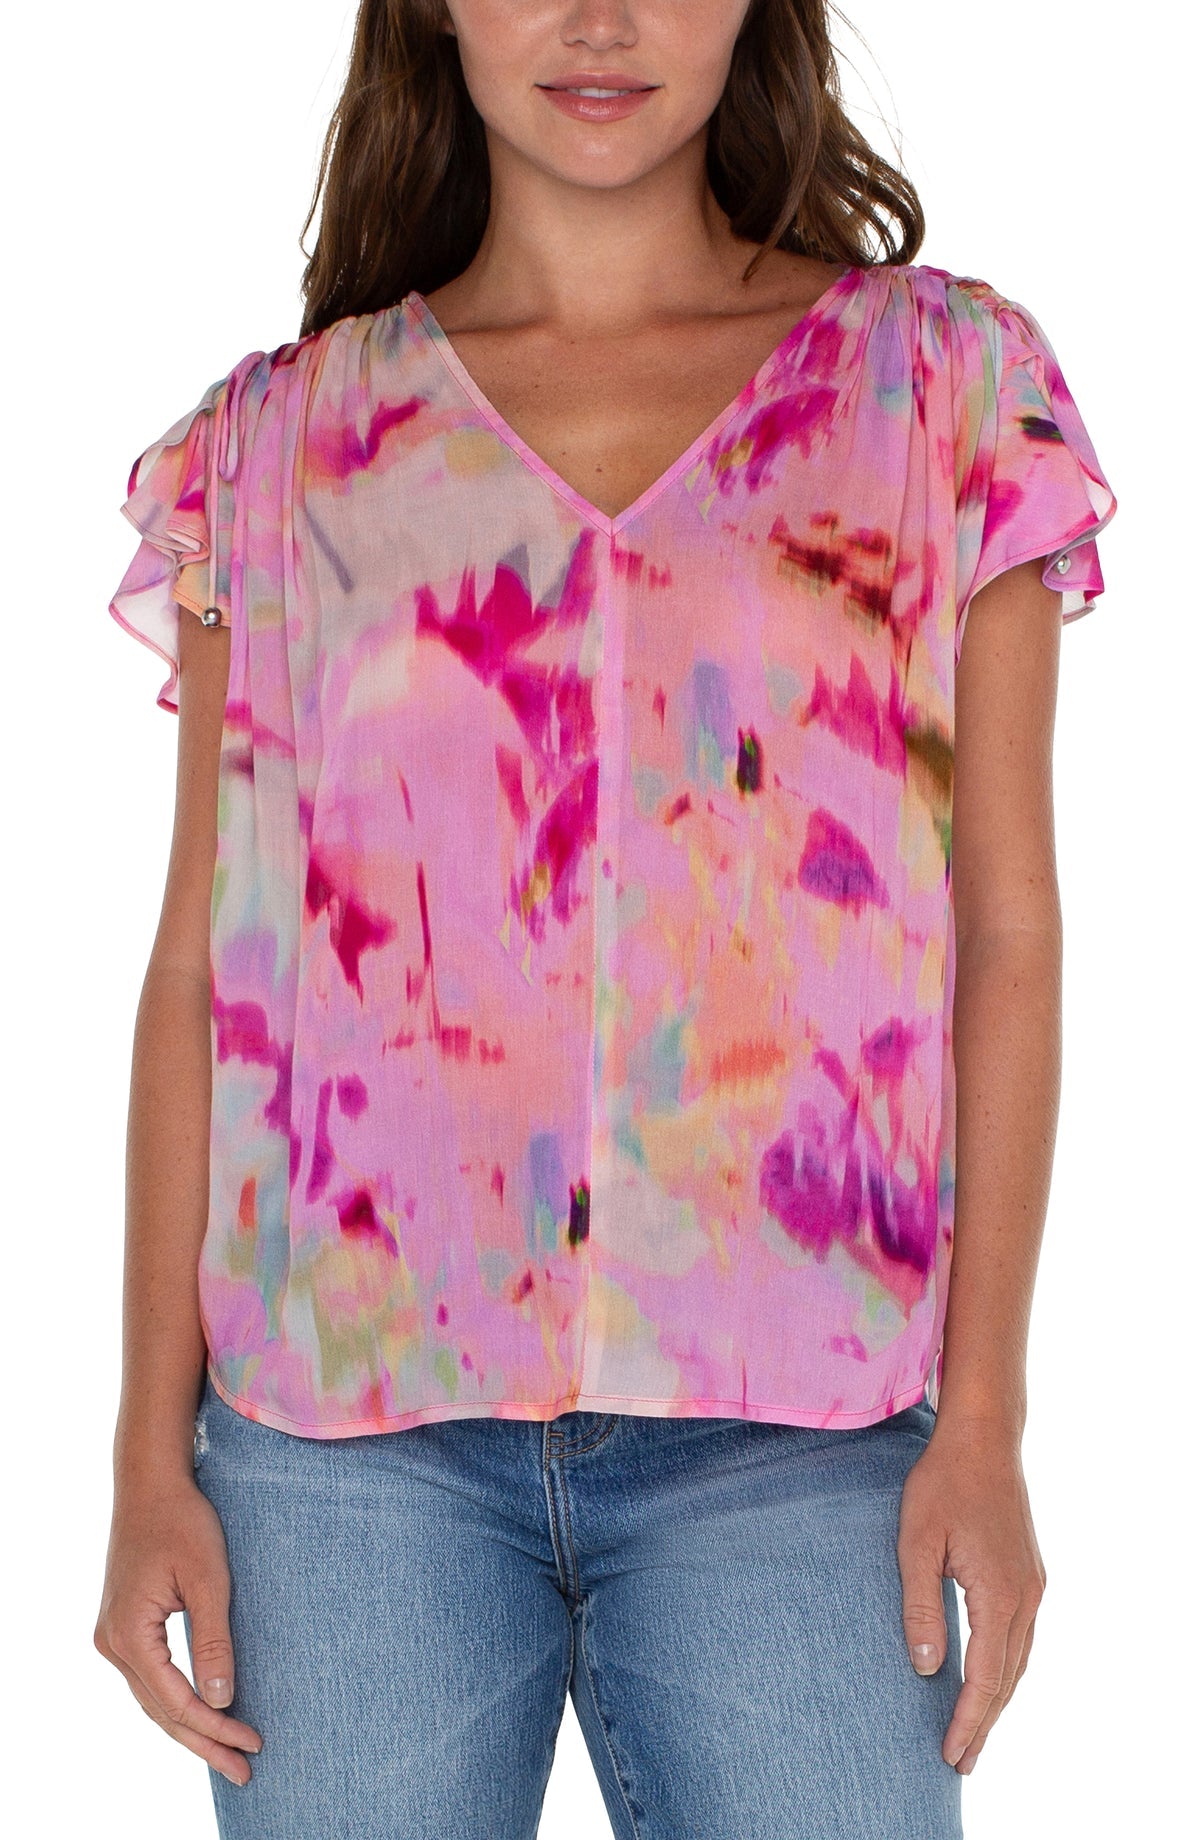 Shirred V-Neck Top With Tie Detail - Fuchsia Watercolor